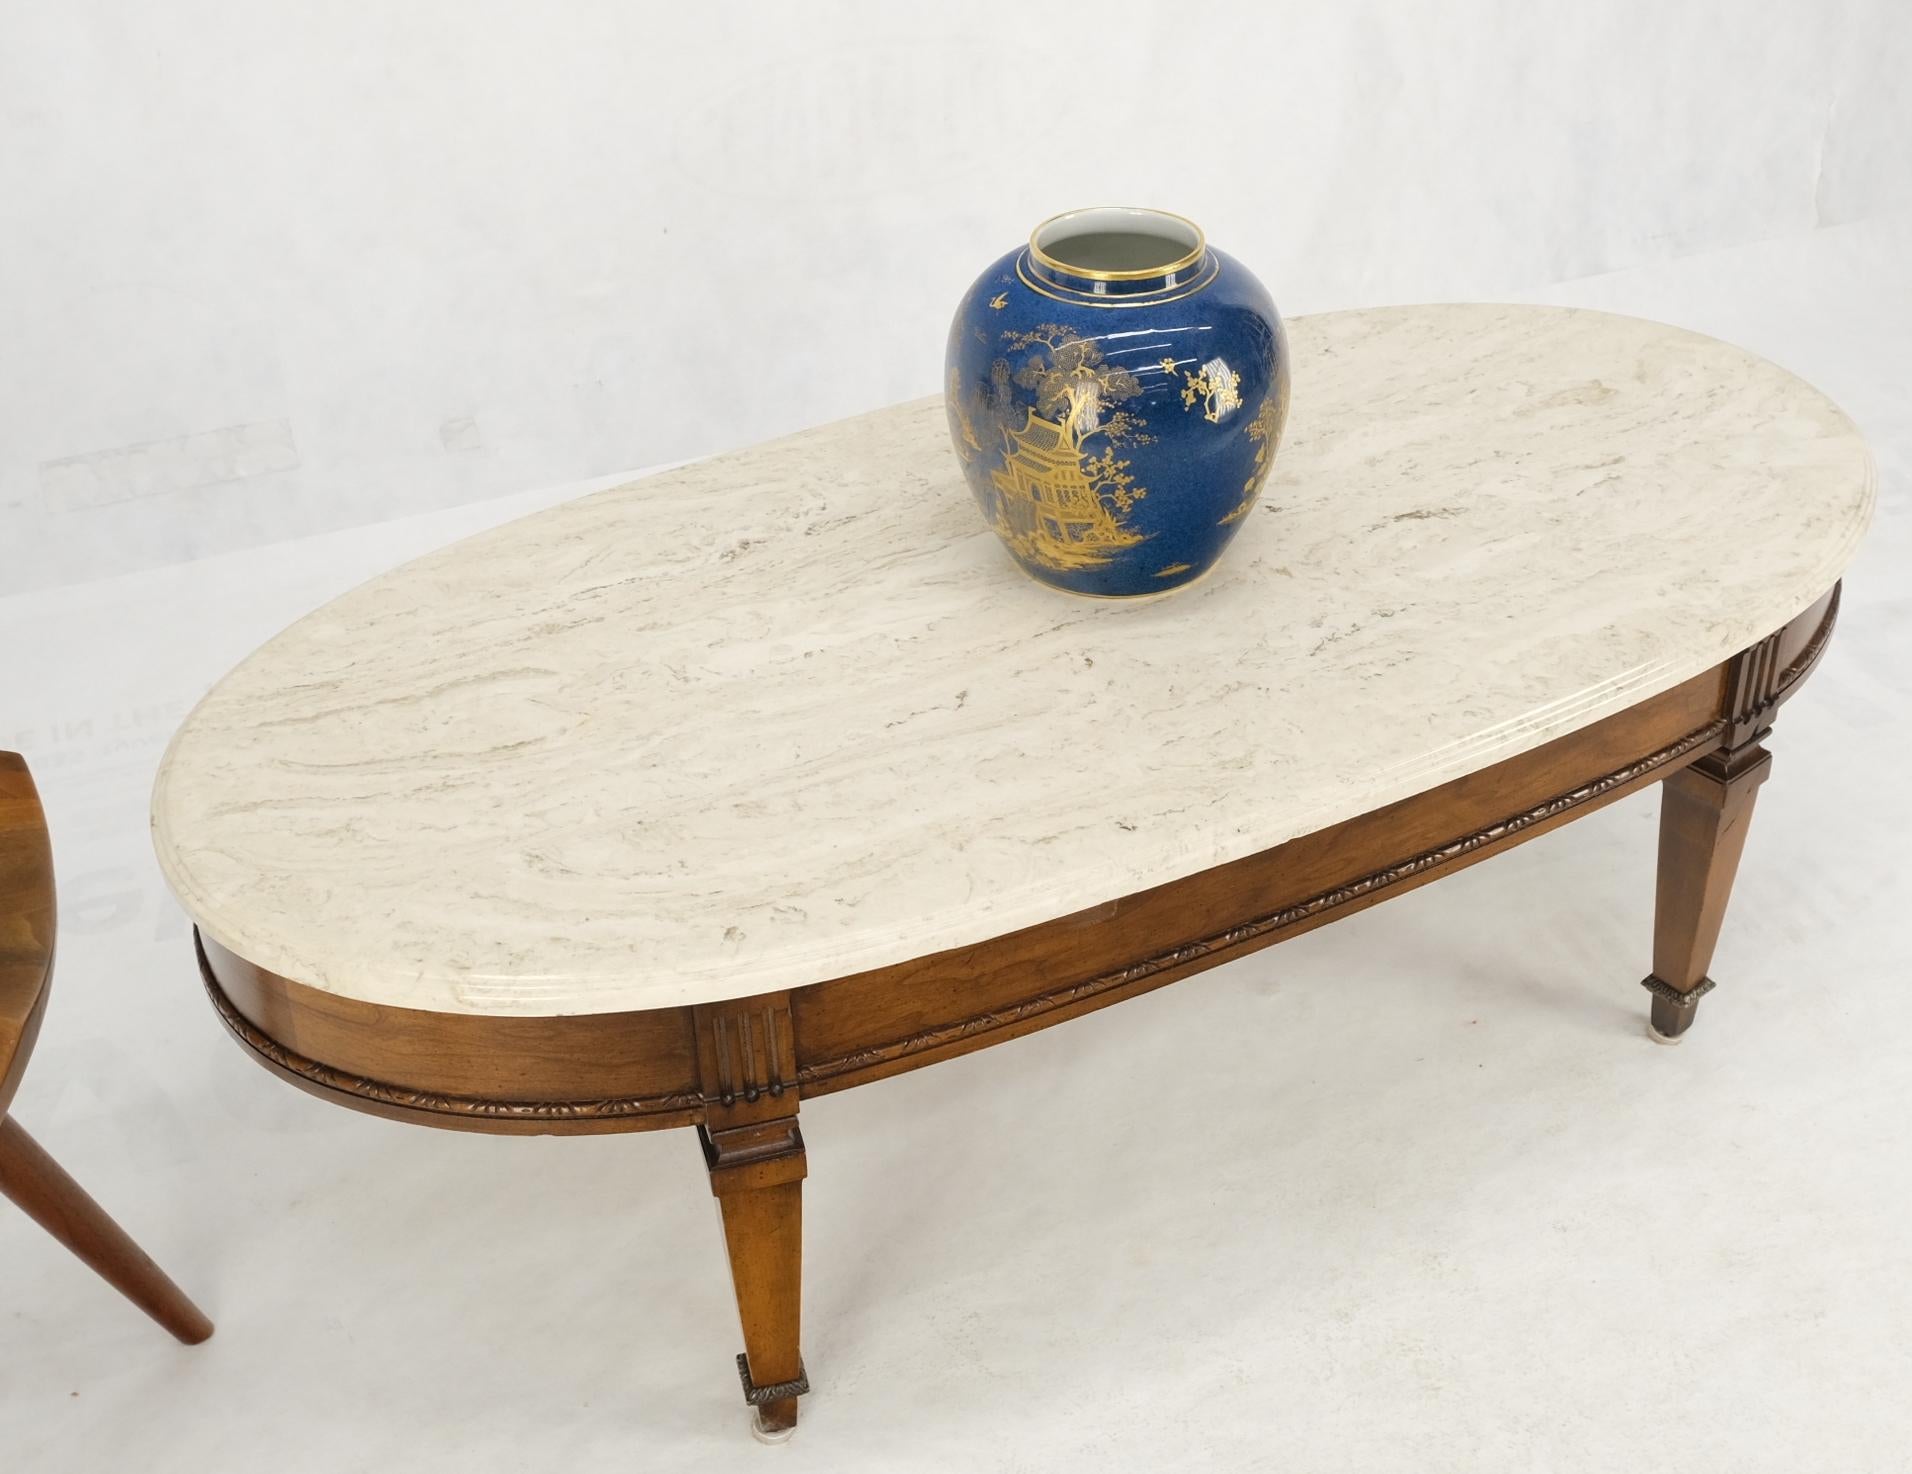 Oval racetrack shape marble top mahogany Federal style coffee table.